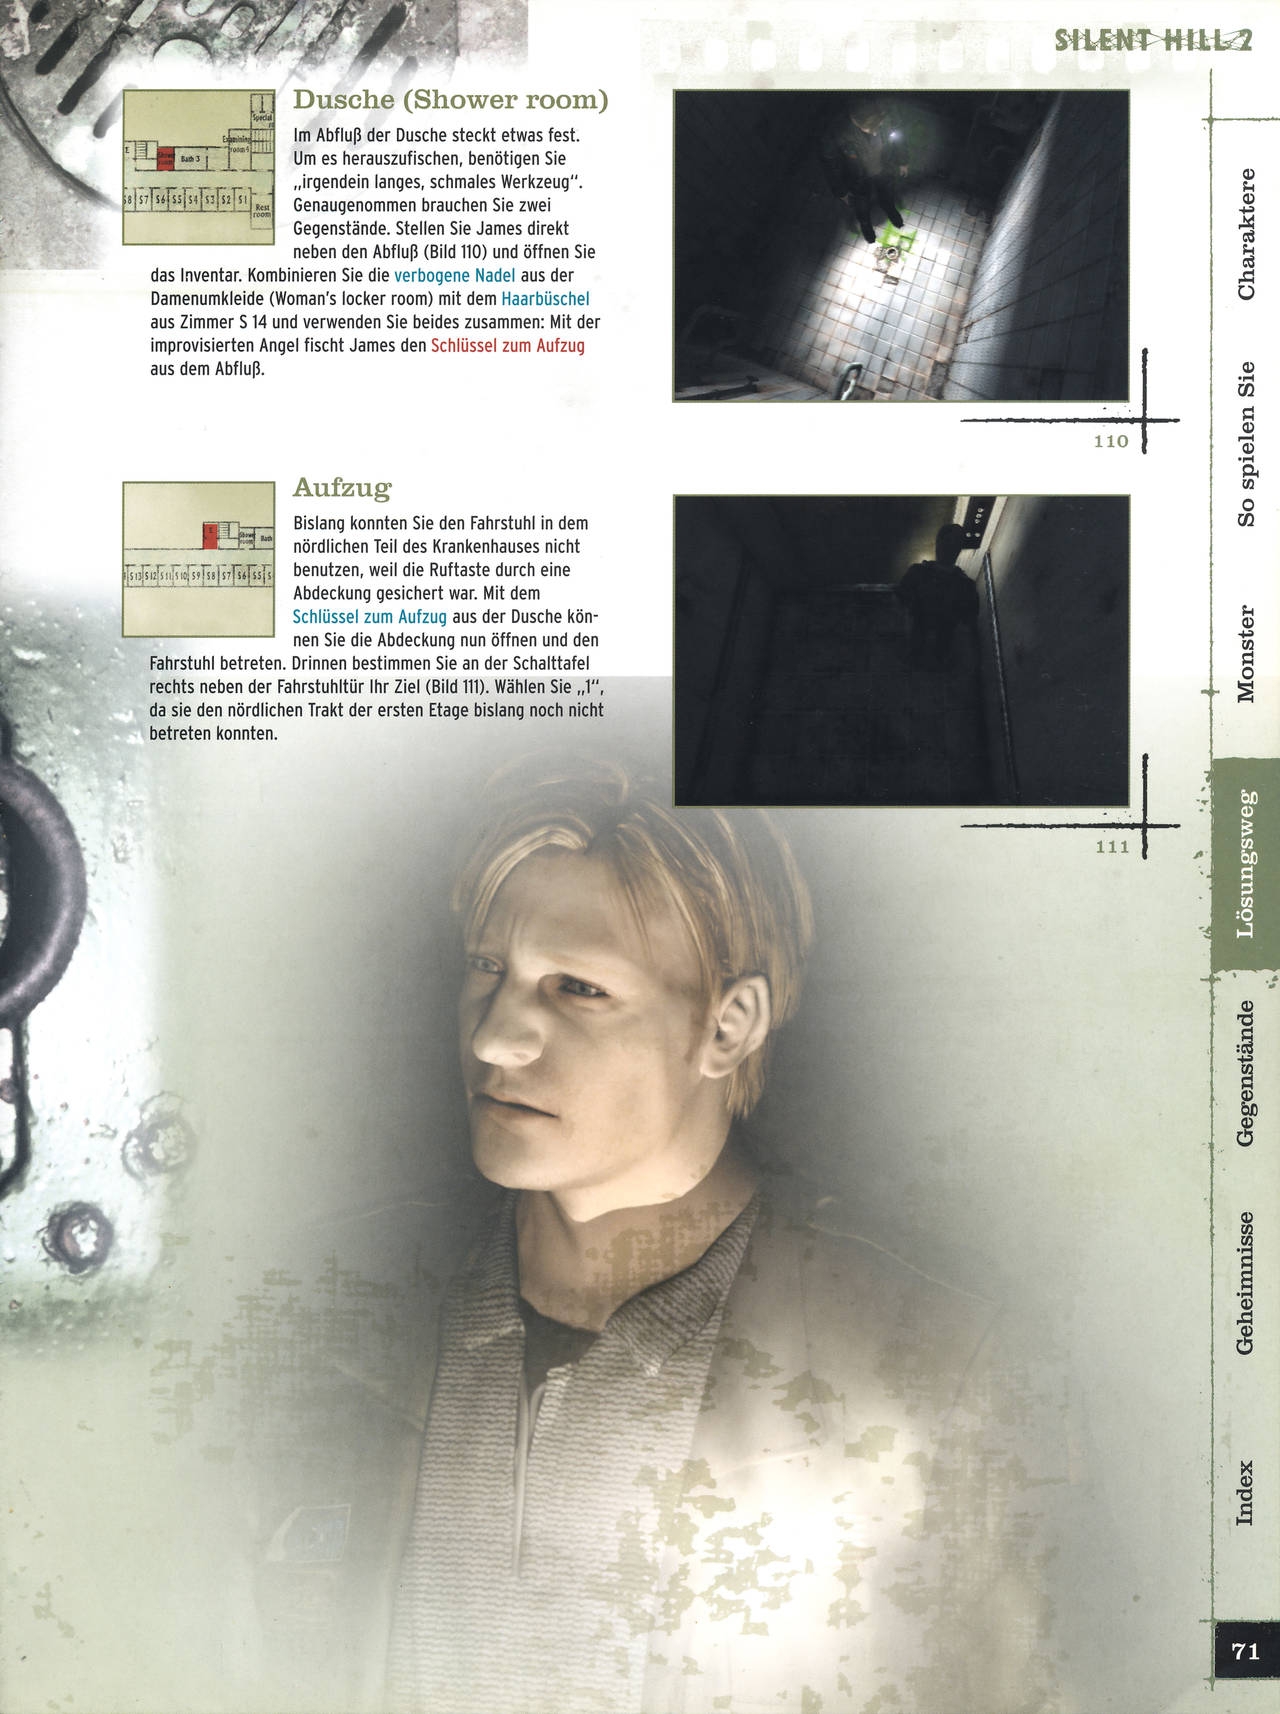 Silent Hill 2 Official Strategy Guide Authoritzed Collection 70